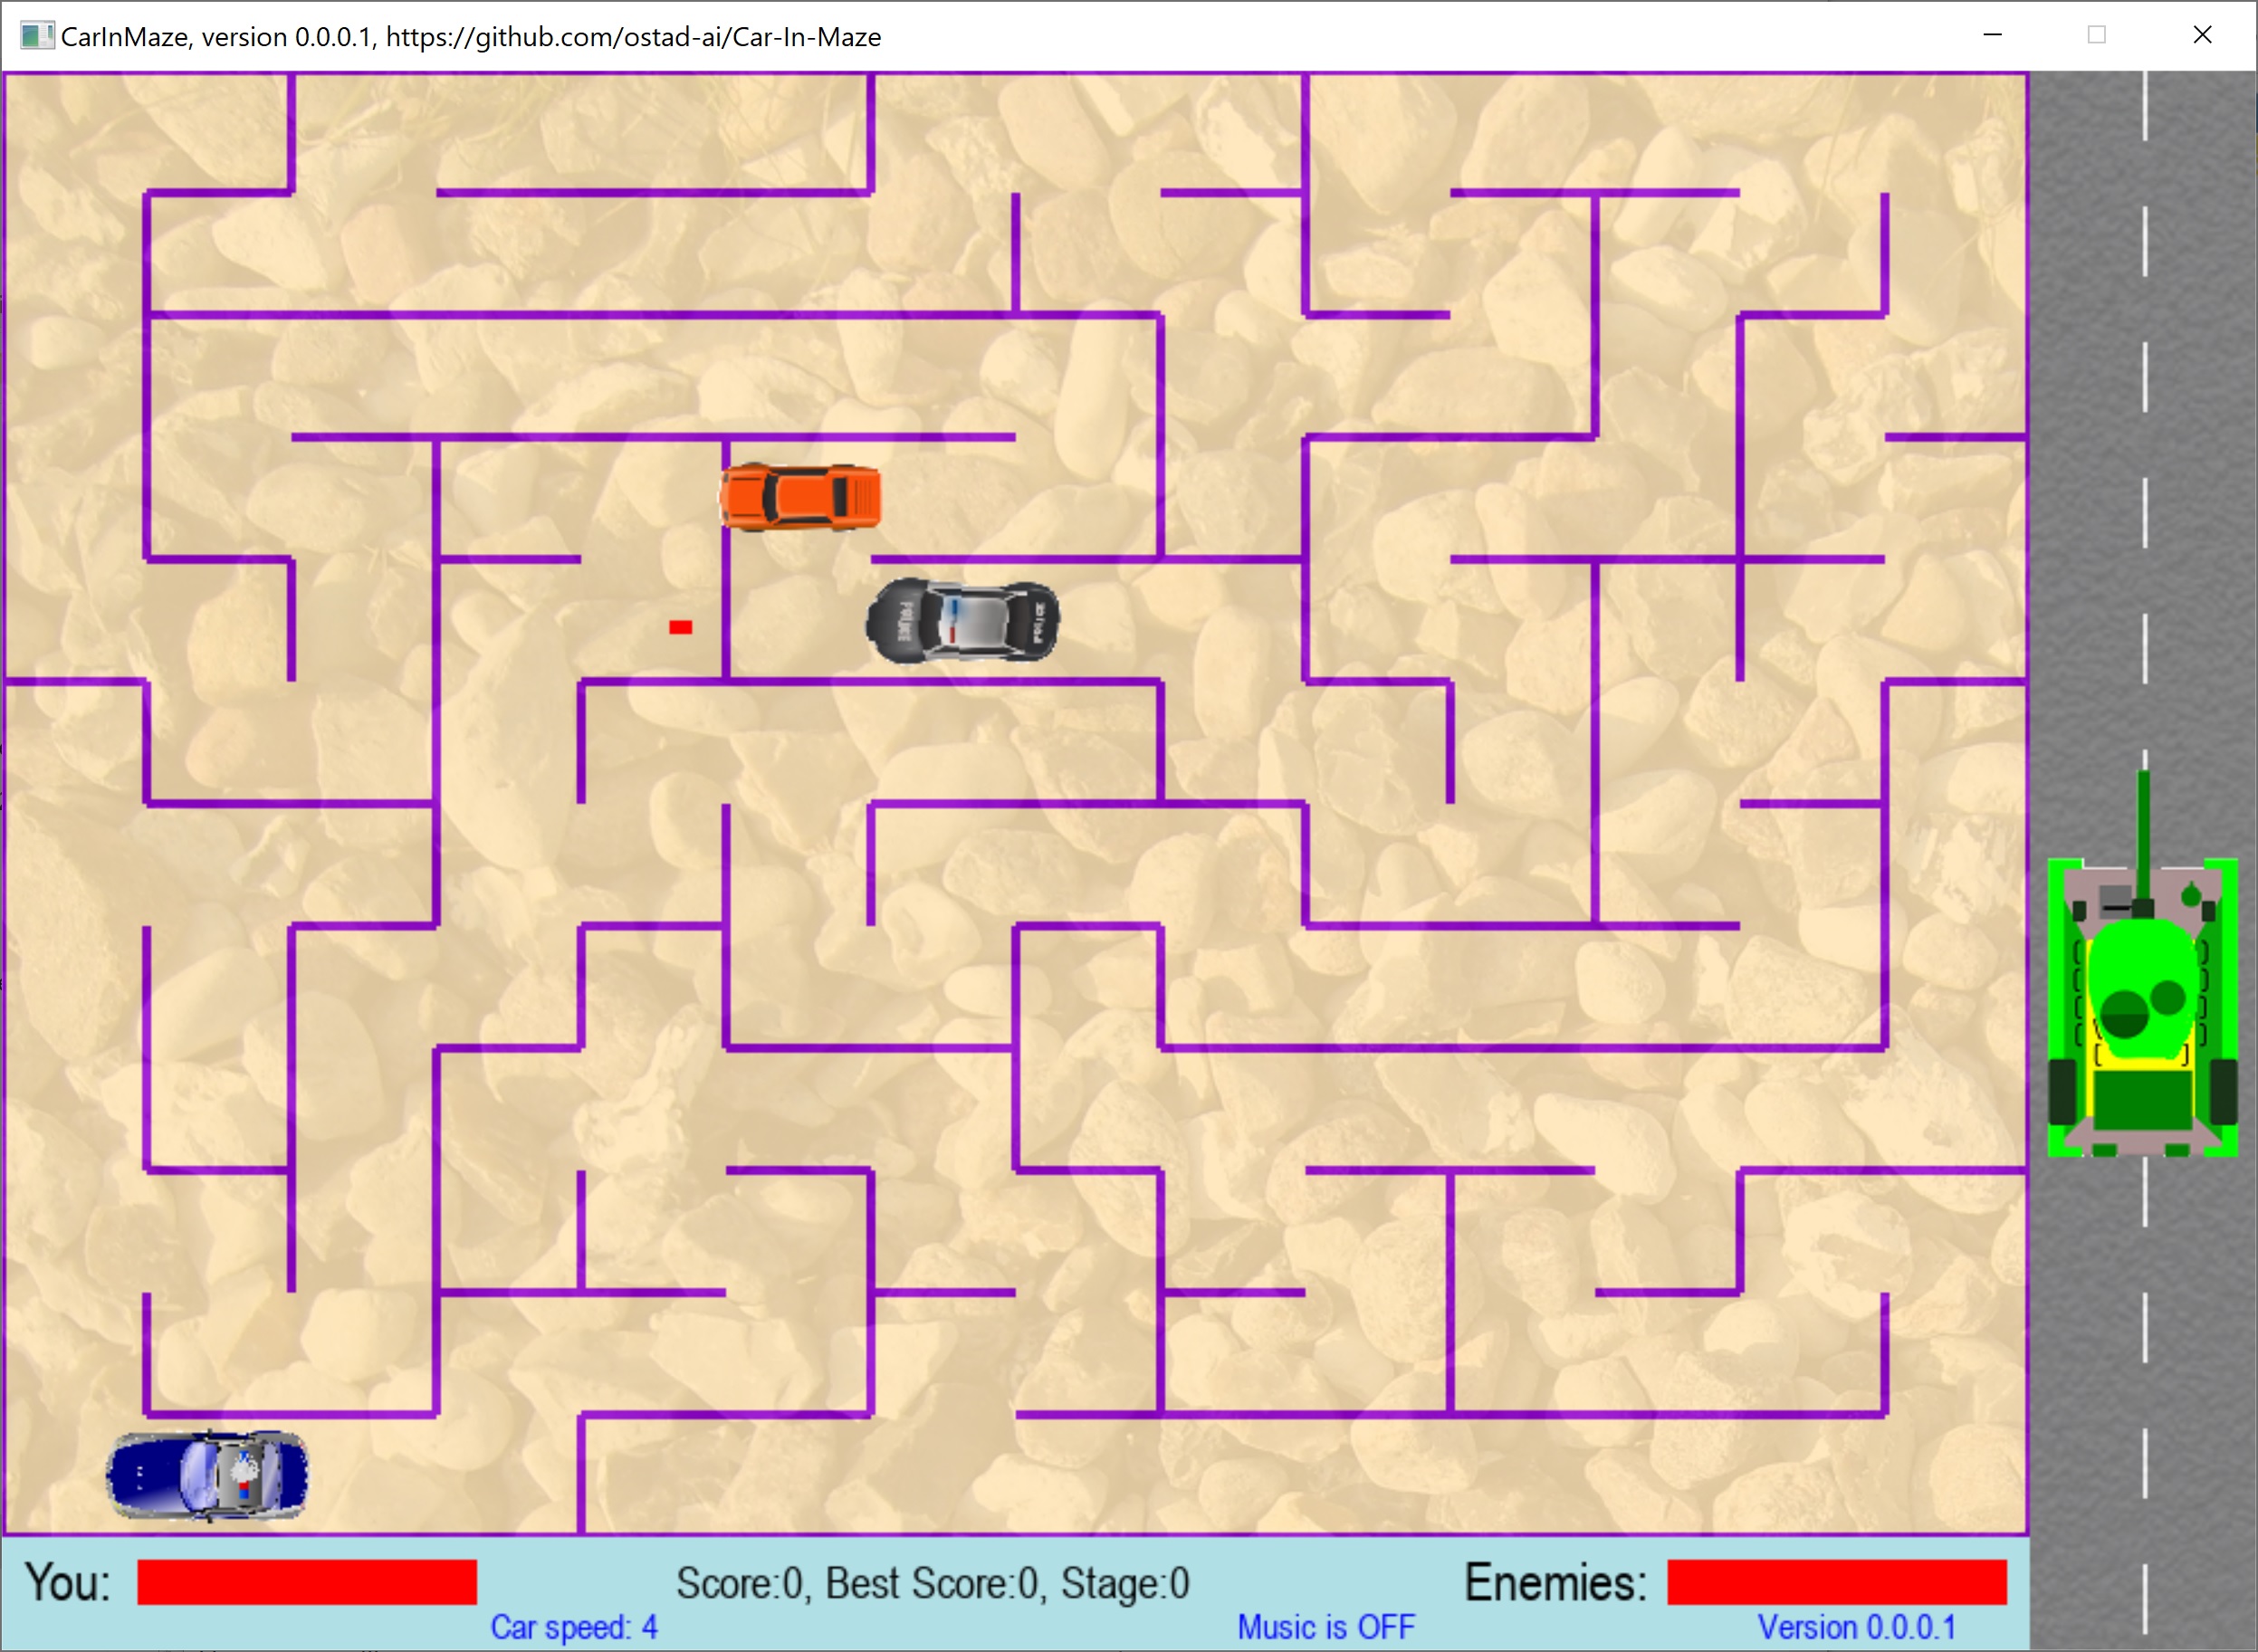 A snapshot of the game: CarInMaze, newest version